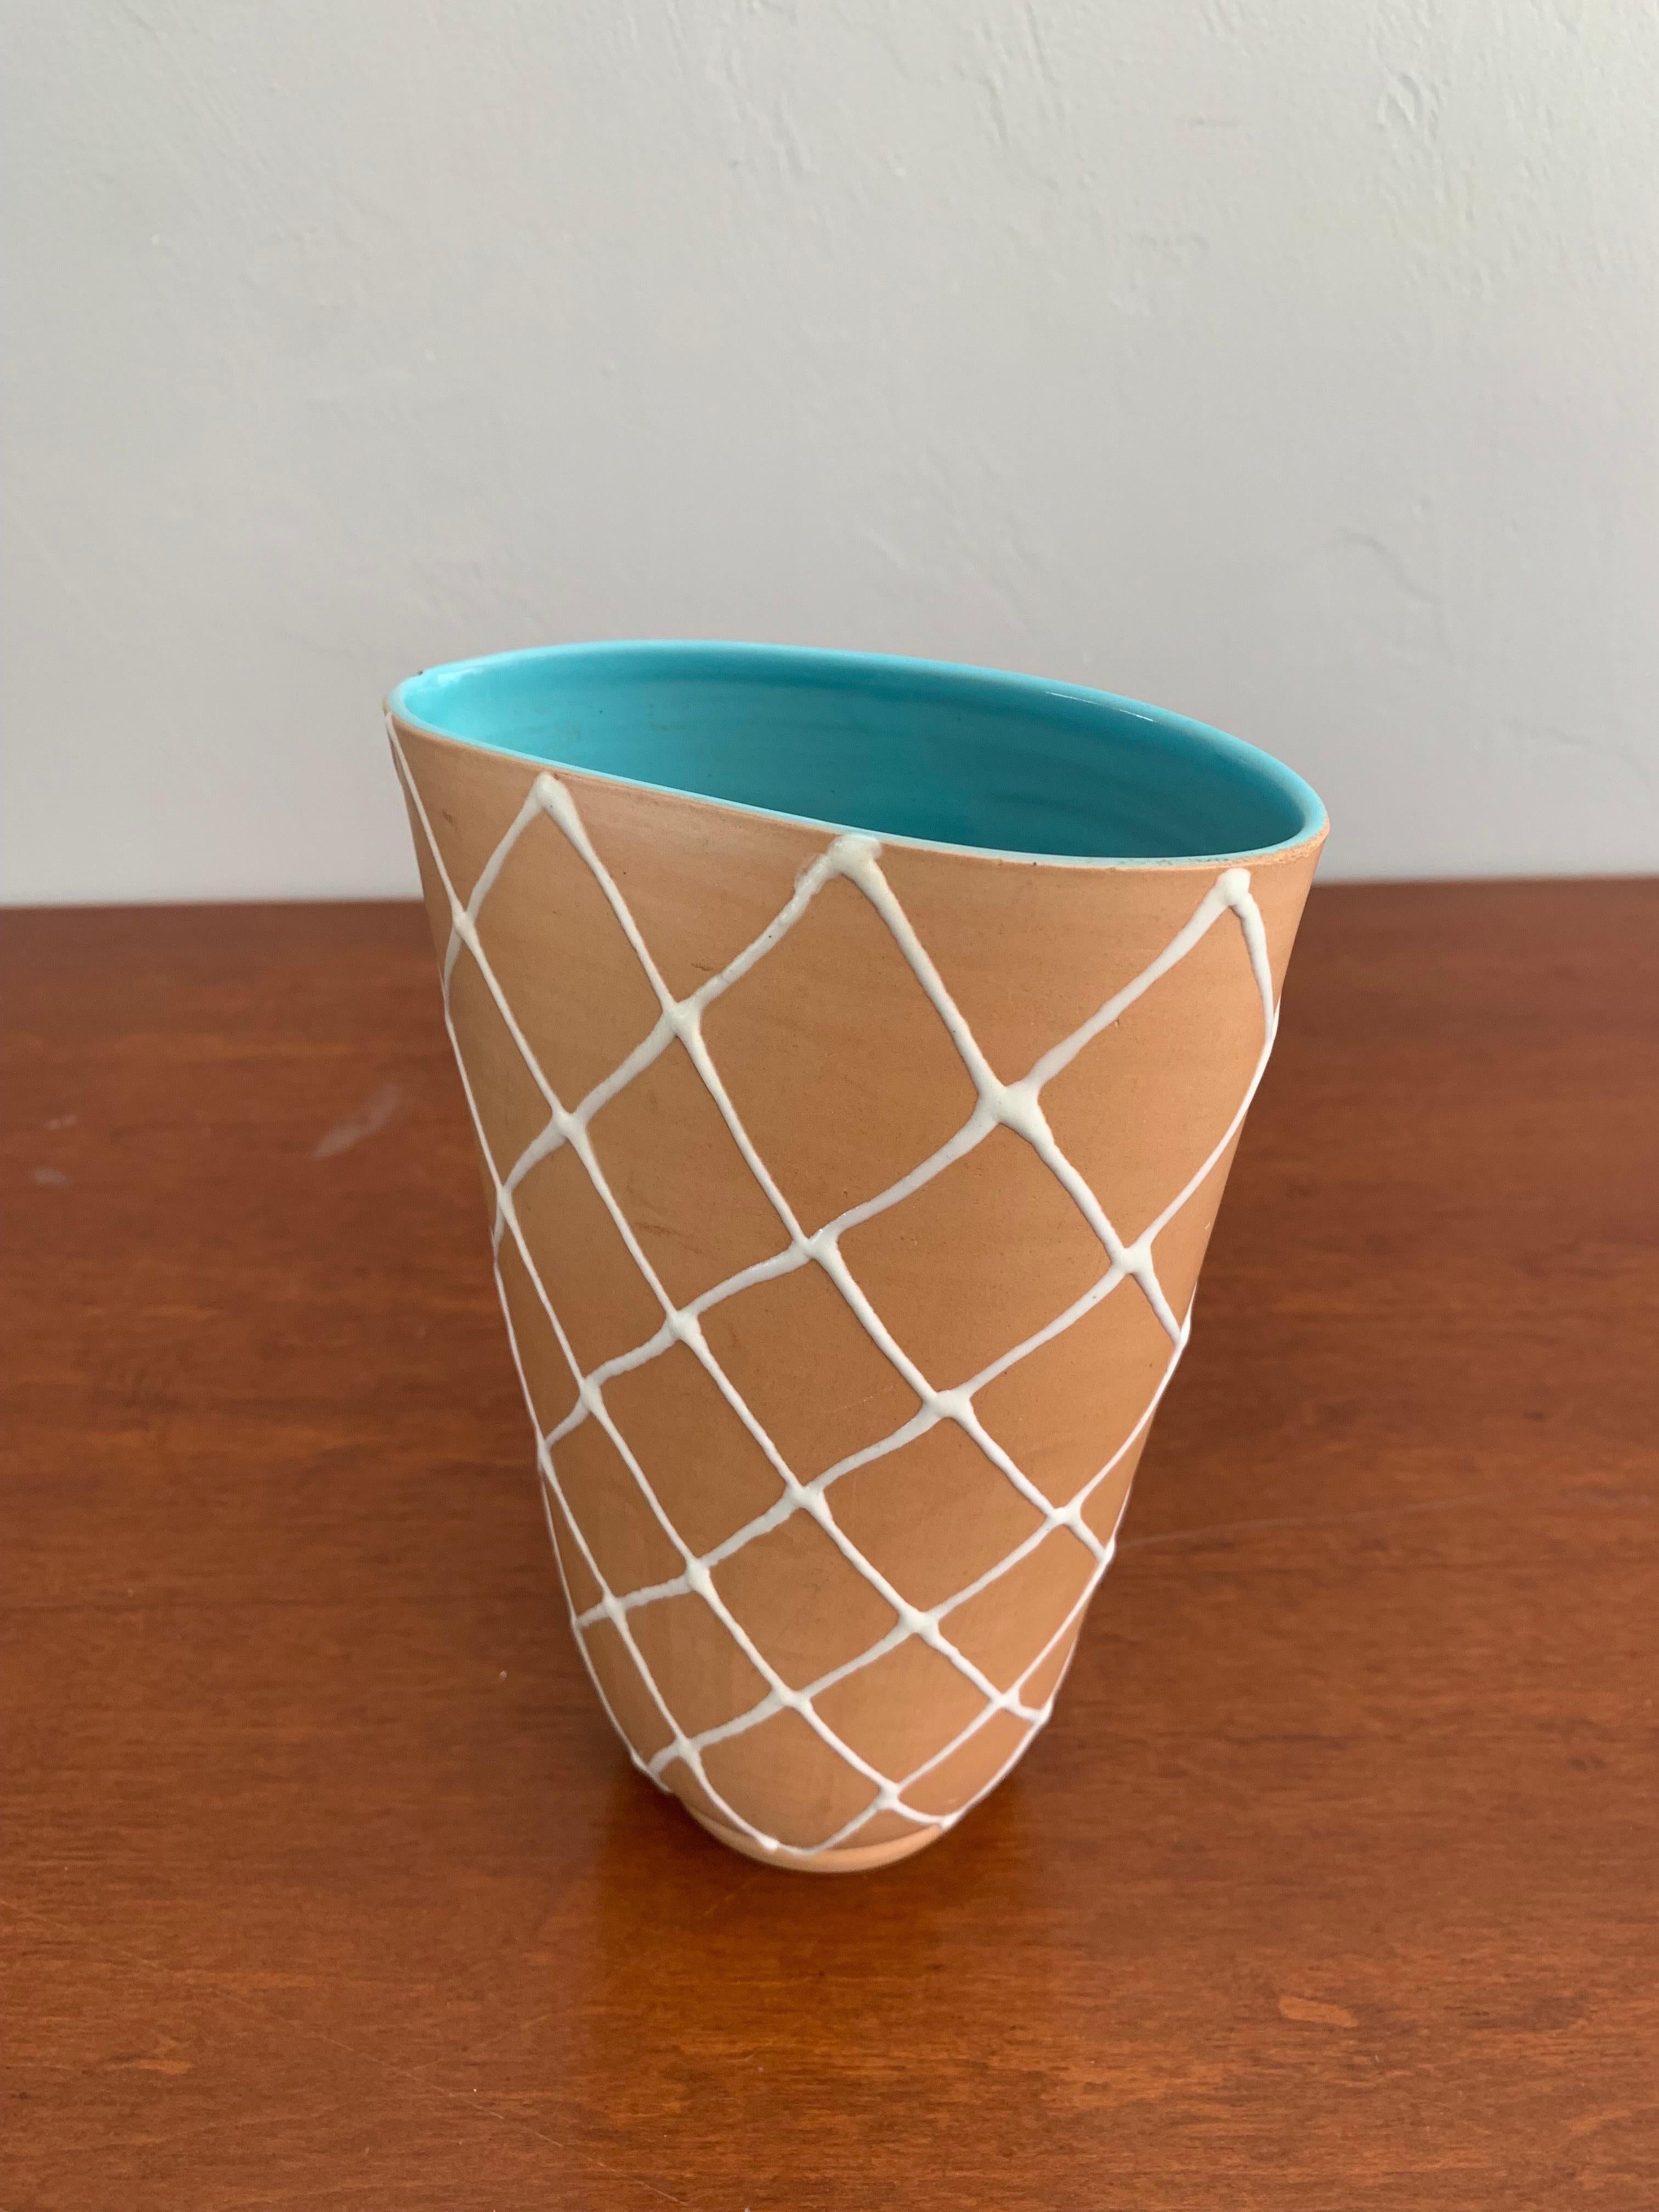 Lovely Italian Mid-Century Modern vase by Alvino Bagni.

A tan exterior with a crisp white cross pattern hiding a beautiful blue glazed interior. 

Vase is 7.5” tall 5” wide and 3.5” deep.